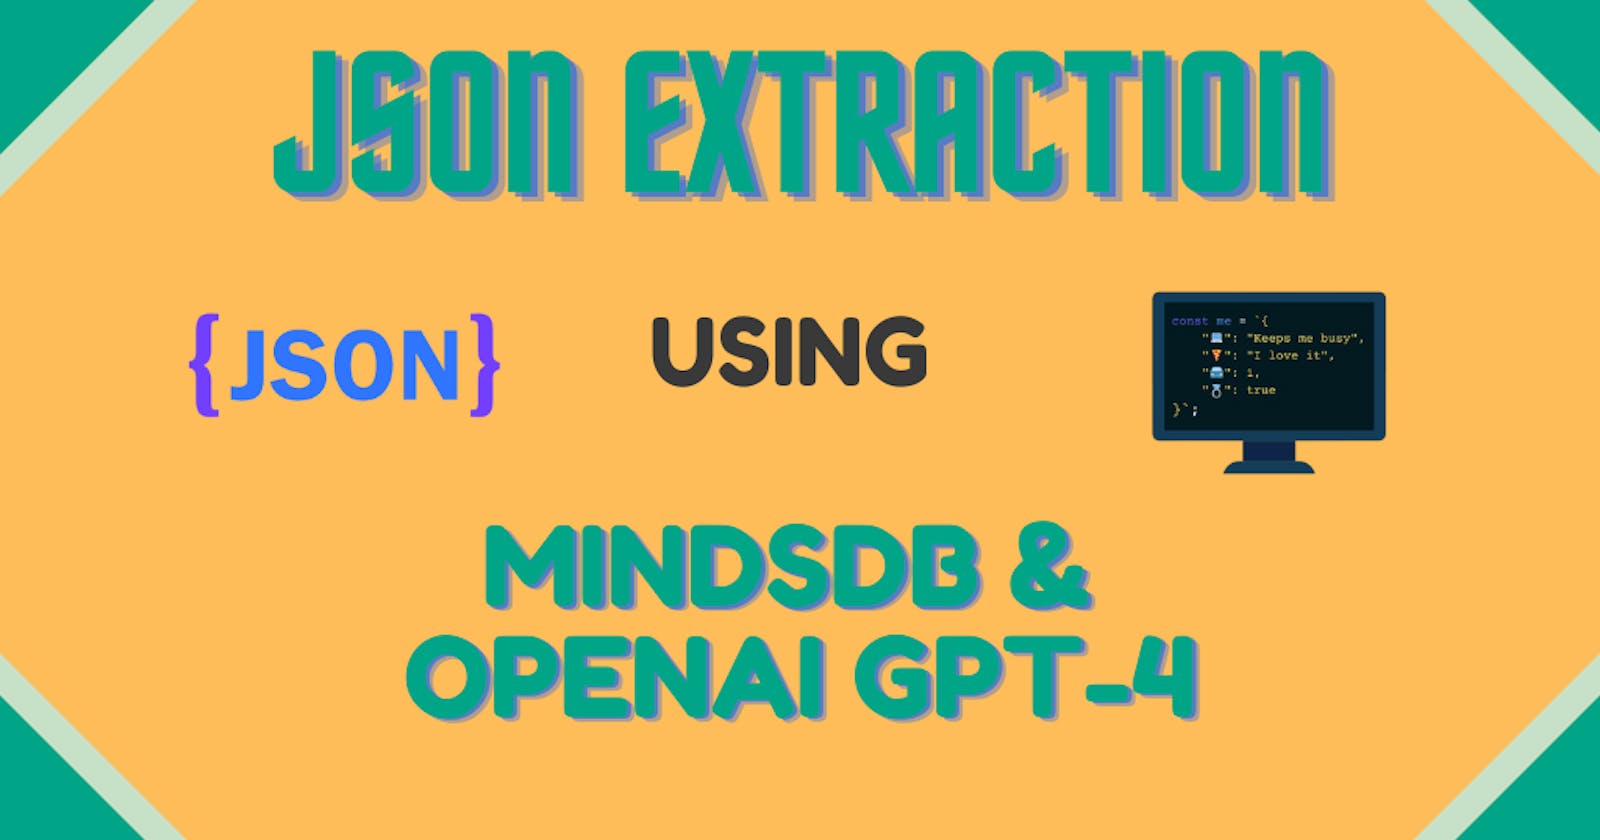 Extracting JSON Data from Texts using OpenAI GPT-4